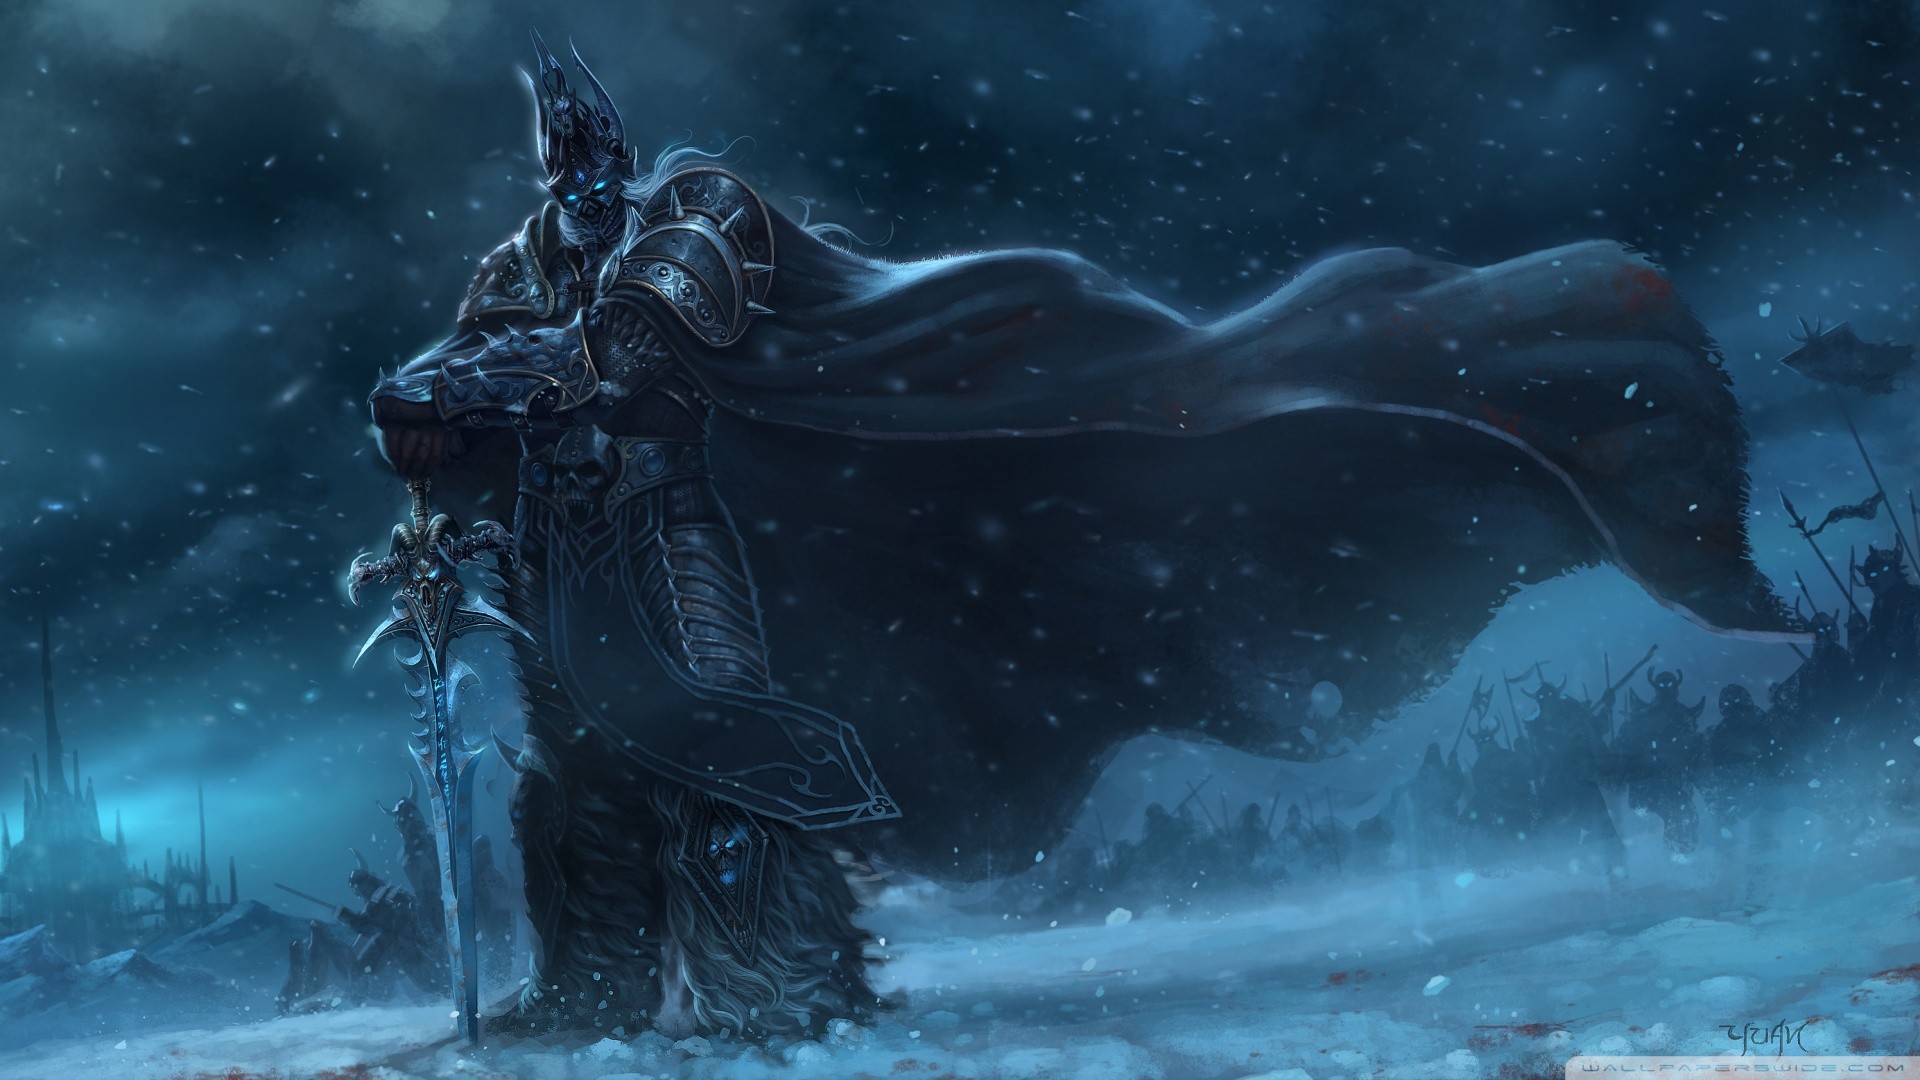 General 1920x1080 World of Warcraft Arthas Menethil video games World of Warcraft: Wrath of the Lich King PC gaming video game art aqua eyes sword cape ice cold winter snow fantasy art